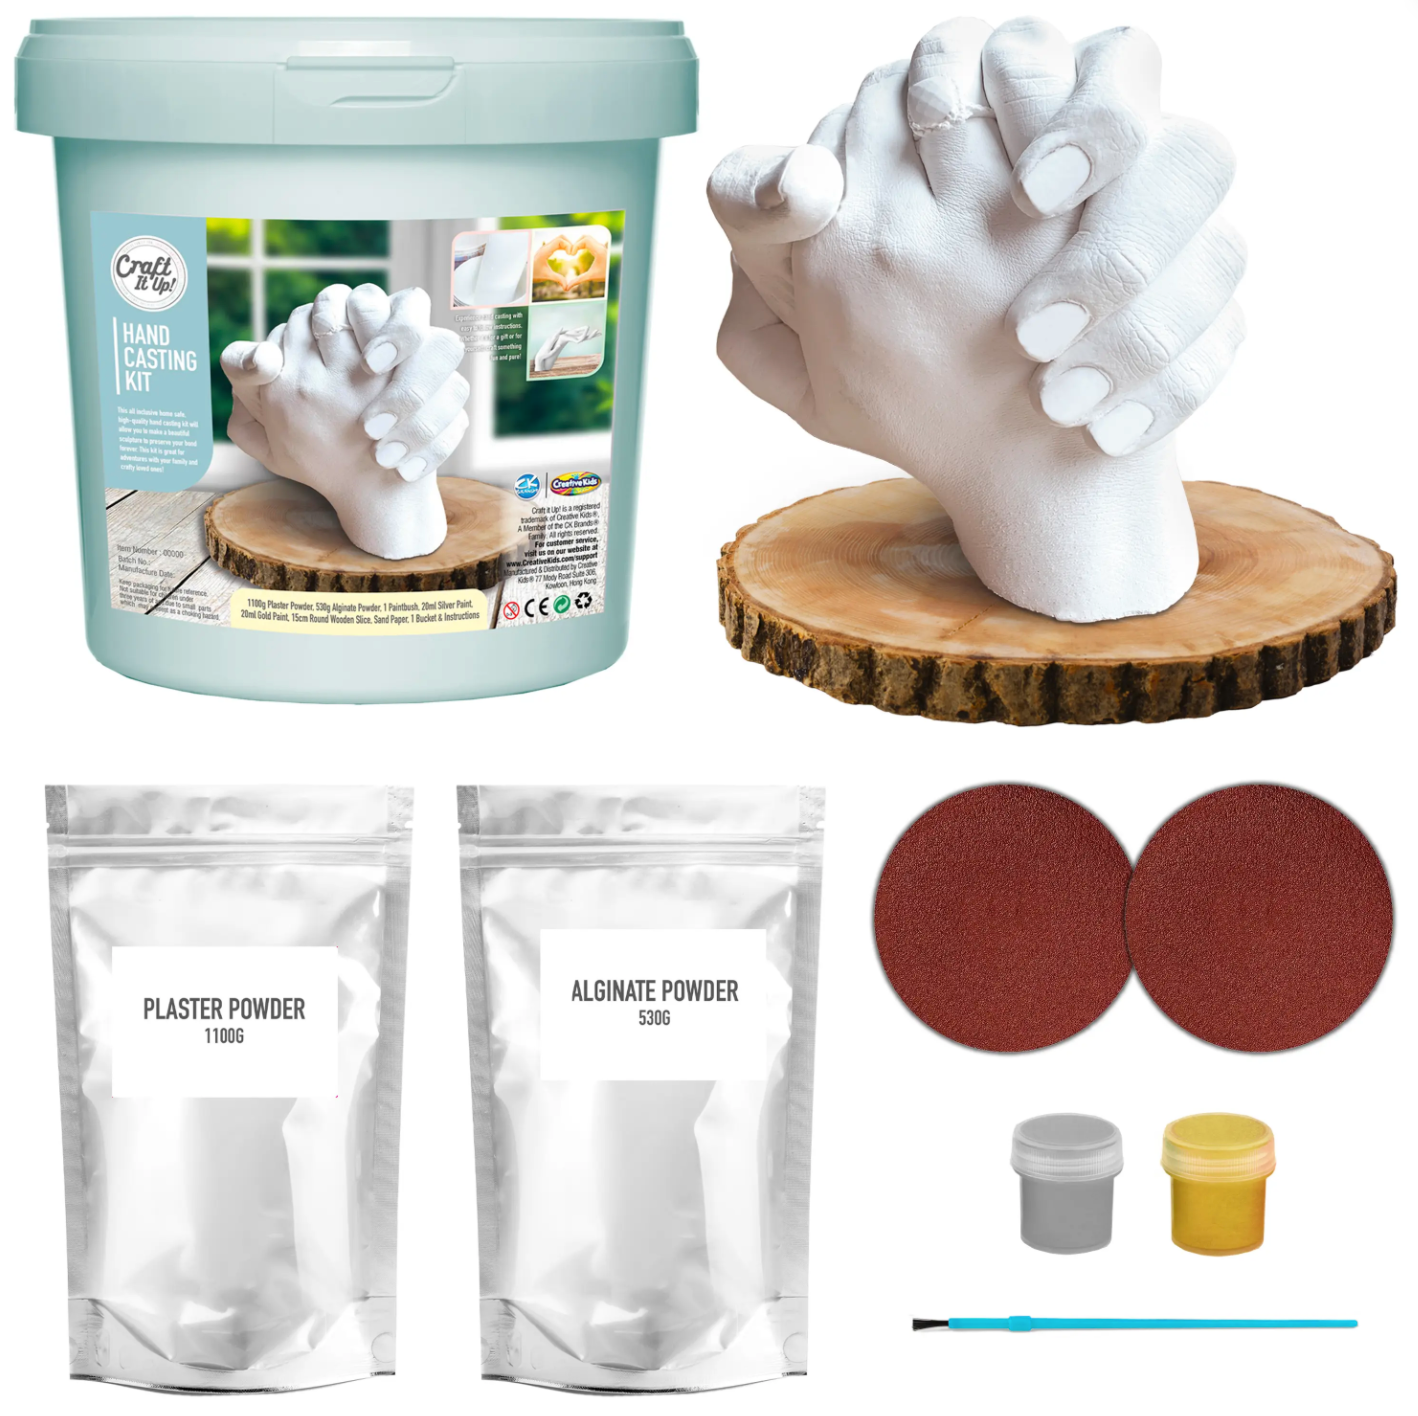 Falling in Art Hand Casting Kit Couples - Keepsake Plaster Hand Mold Kit  for Family, Kids, Adults with Large Bucket, Gloves, Powder Materials, Color